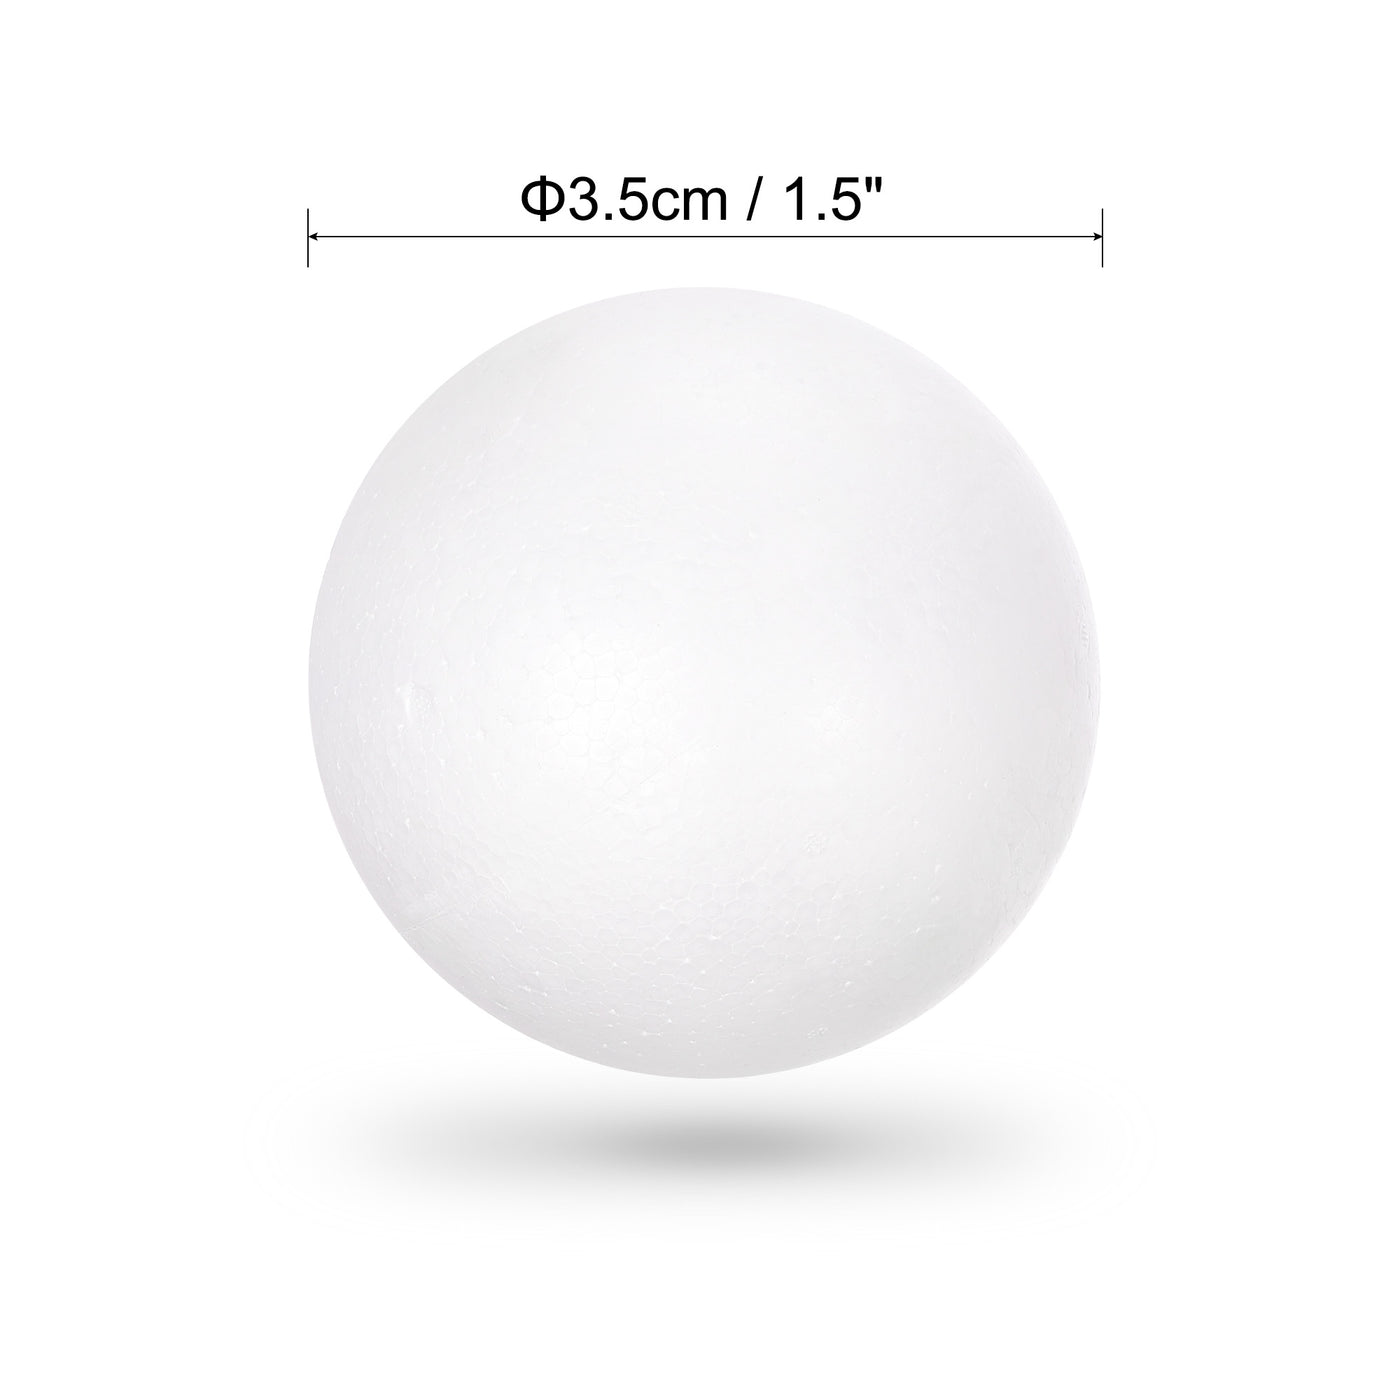 Uxcell Uxcell 75Pcs 1.5" White Polystyrene Foam Solid Balls for Crafts and Party Decorations